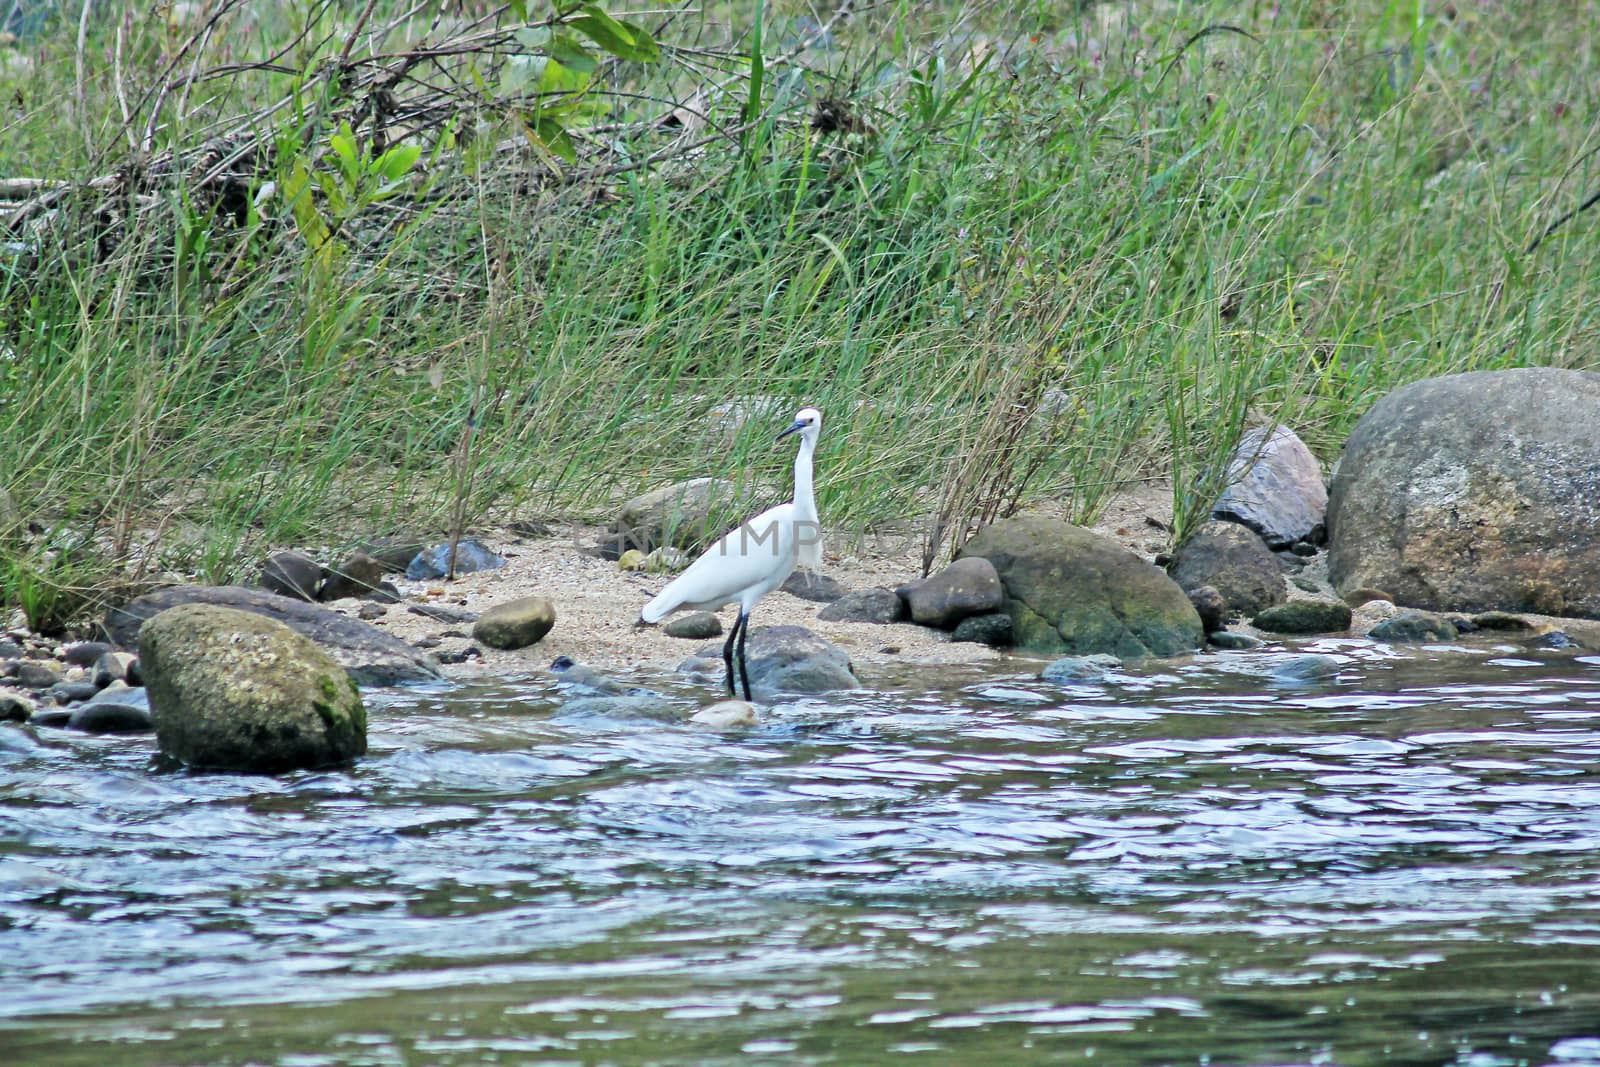 A white egret walking foraging along the rocks in the water